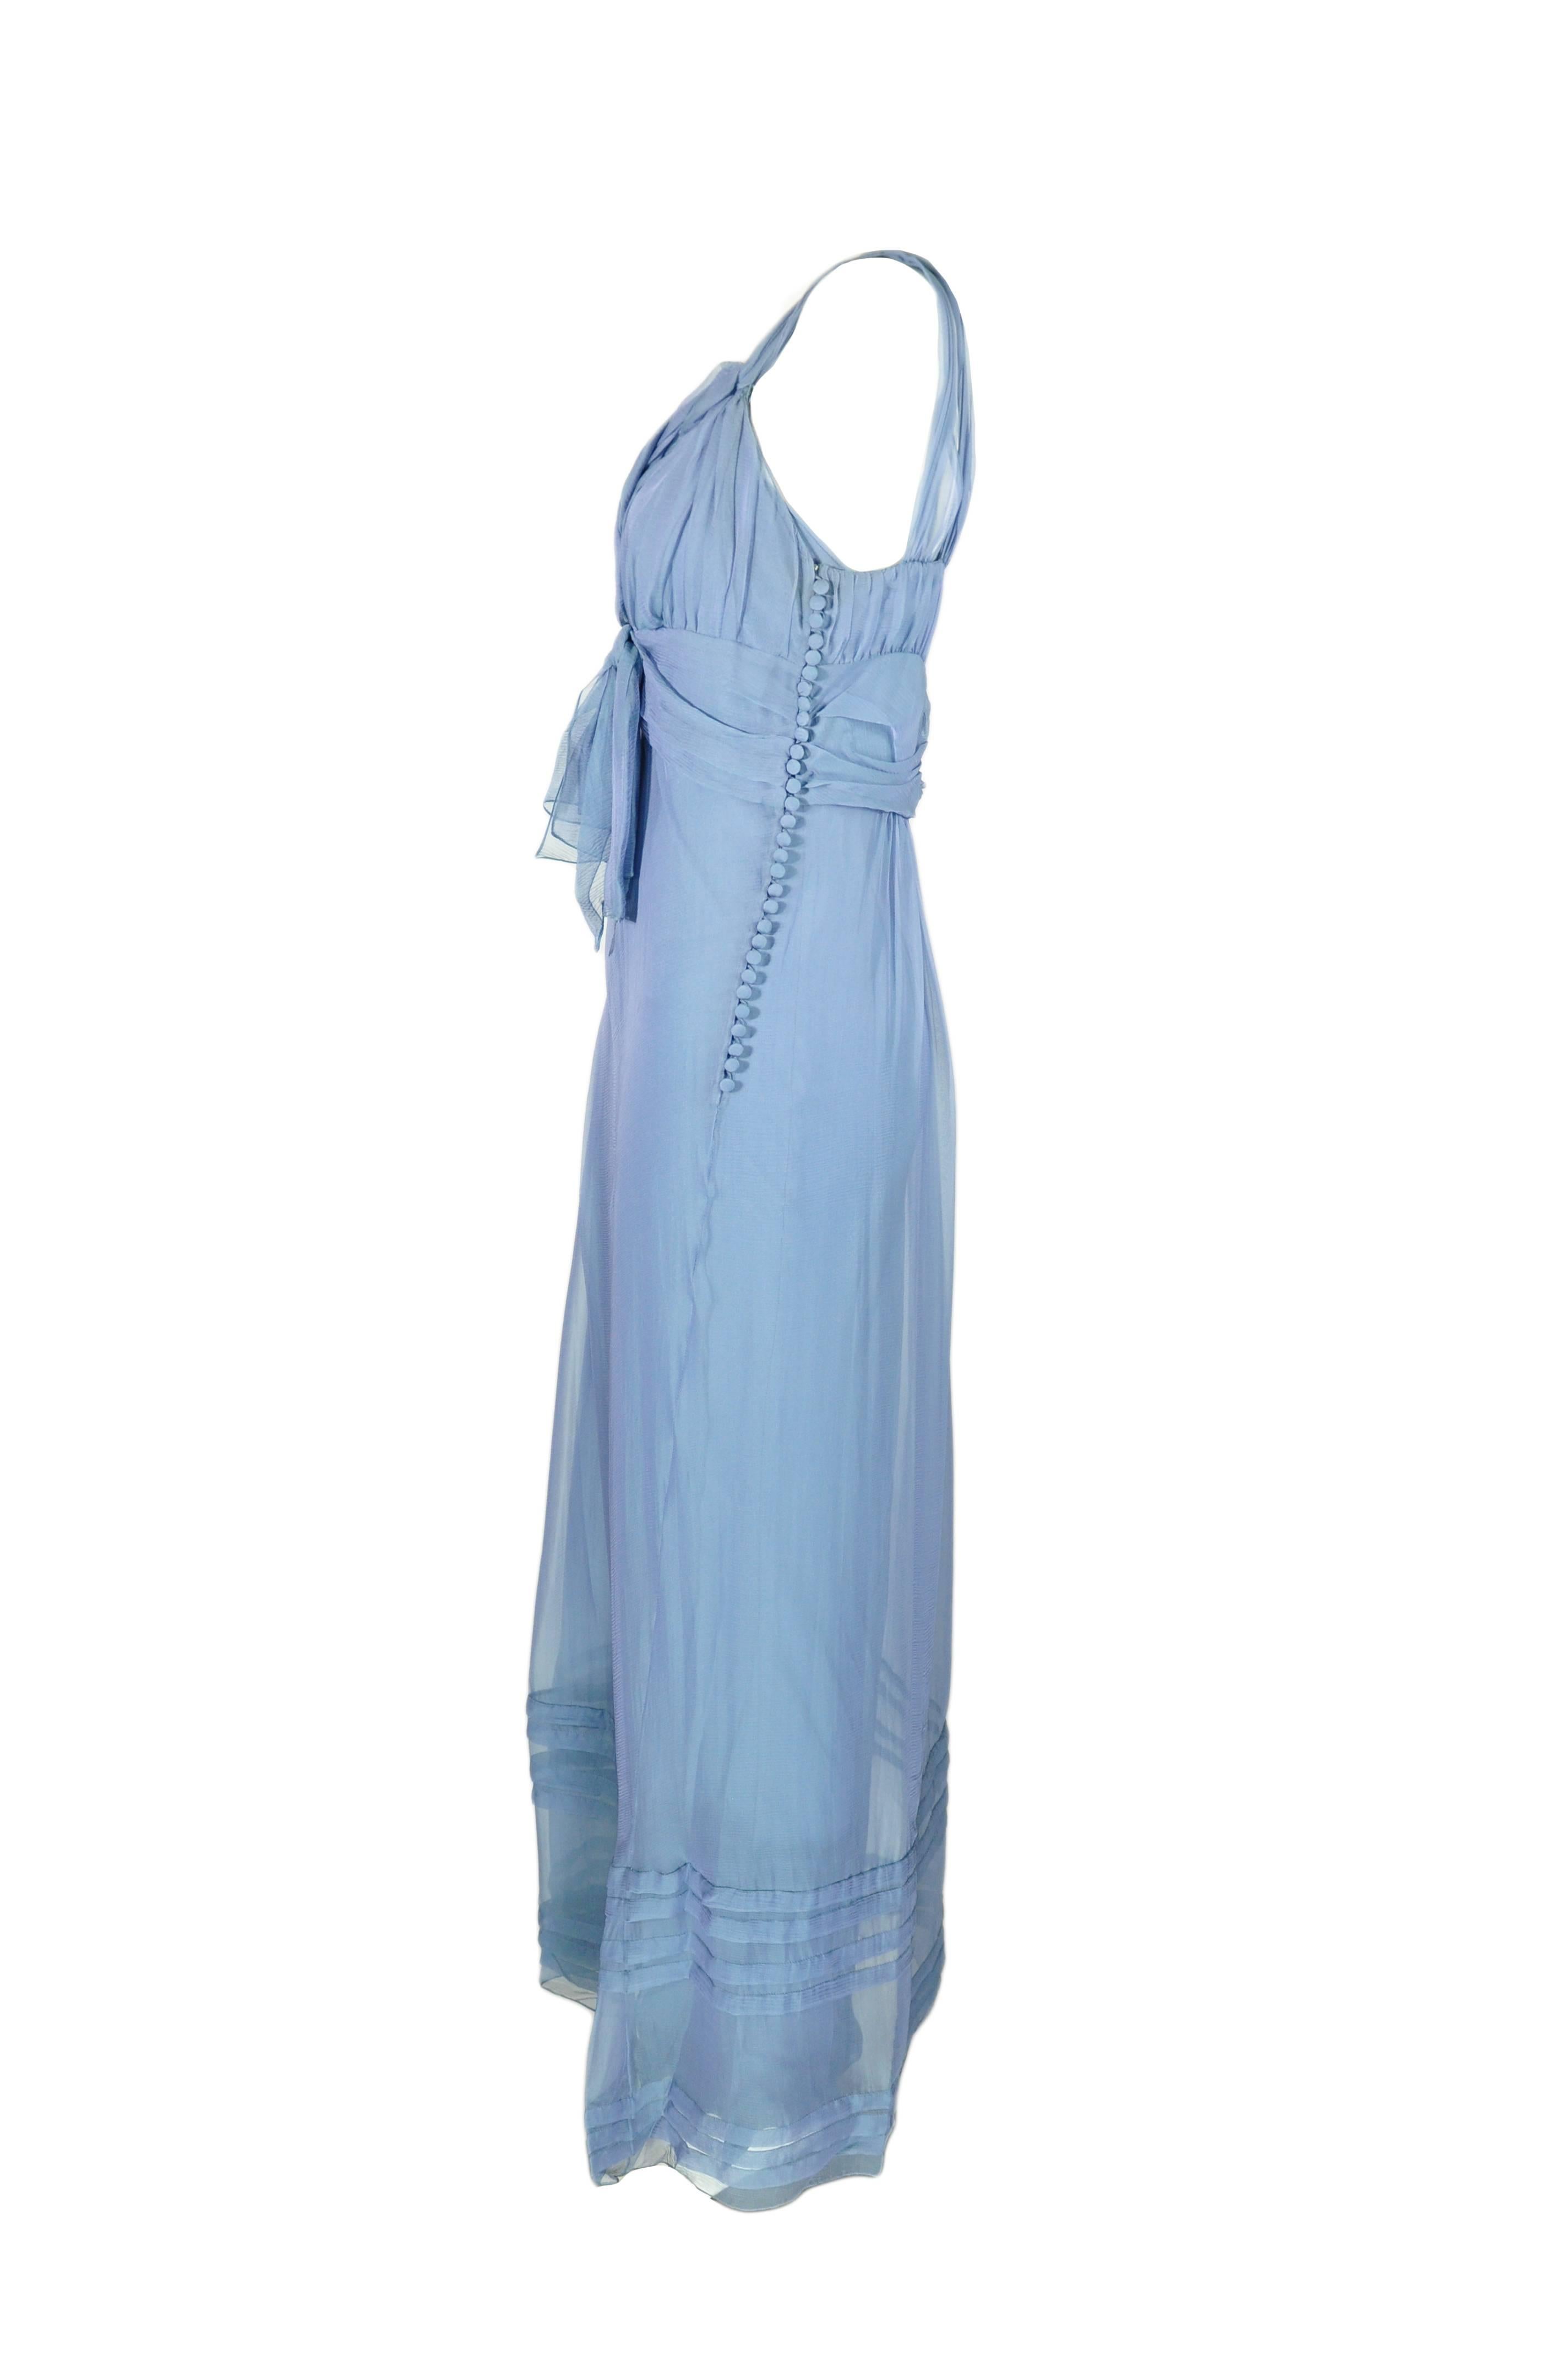 A beautiful silk chiffon ruffled hem maxi dress in ciel bleu from Dior by John Galliano featuring  the pleated bodice with ties and shoulder straps. Button and loop fastening at side with a slip dress. 